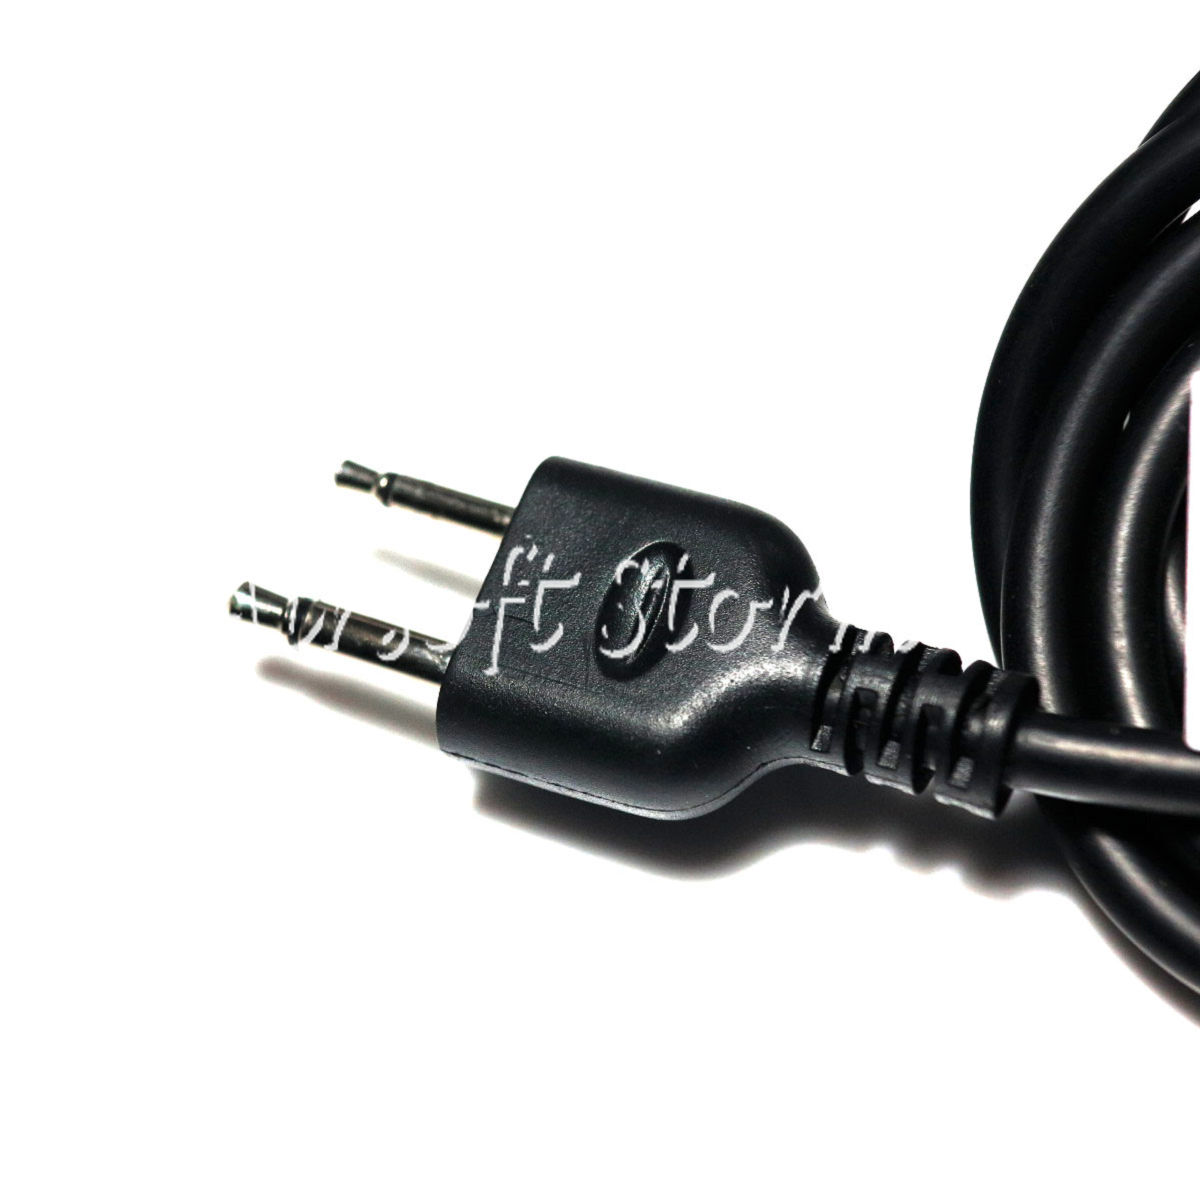 Airsoft Gear SWAT Z Tactical Wireless Headset Cable & PTT for ICOM 2 Pin Radio